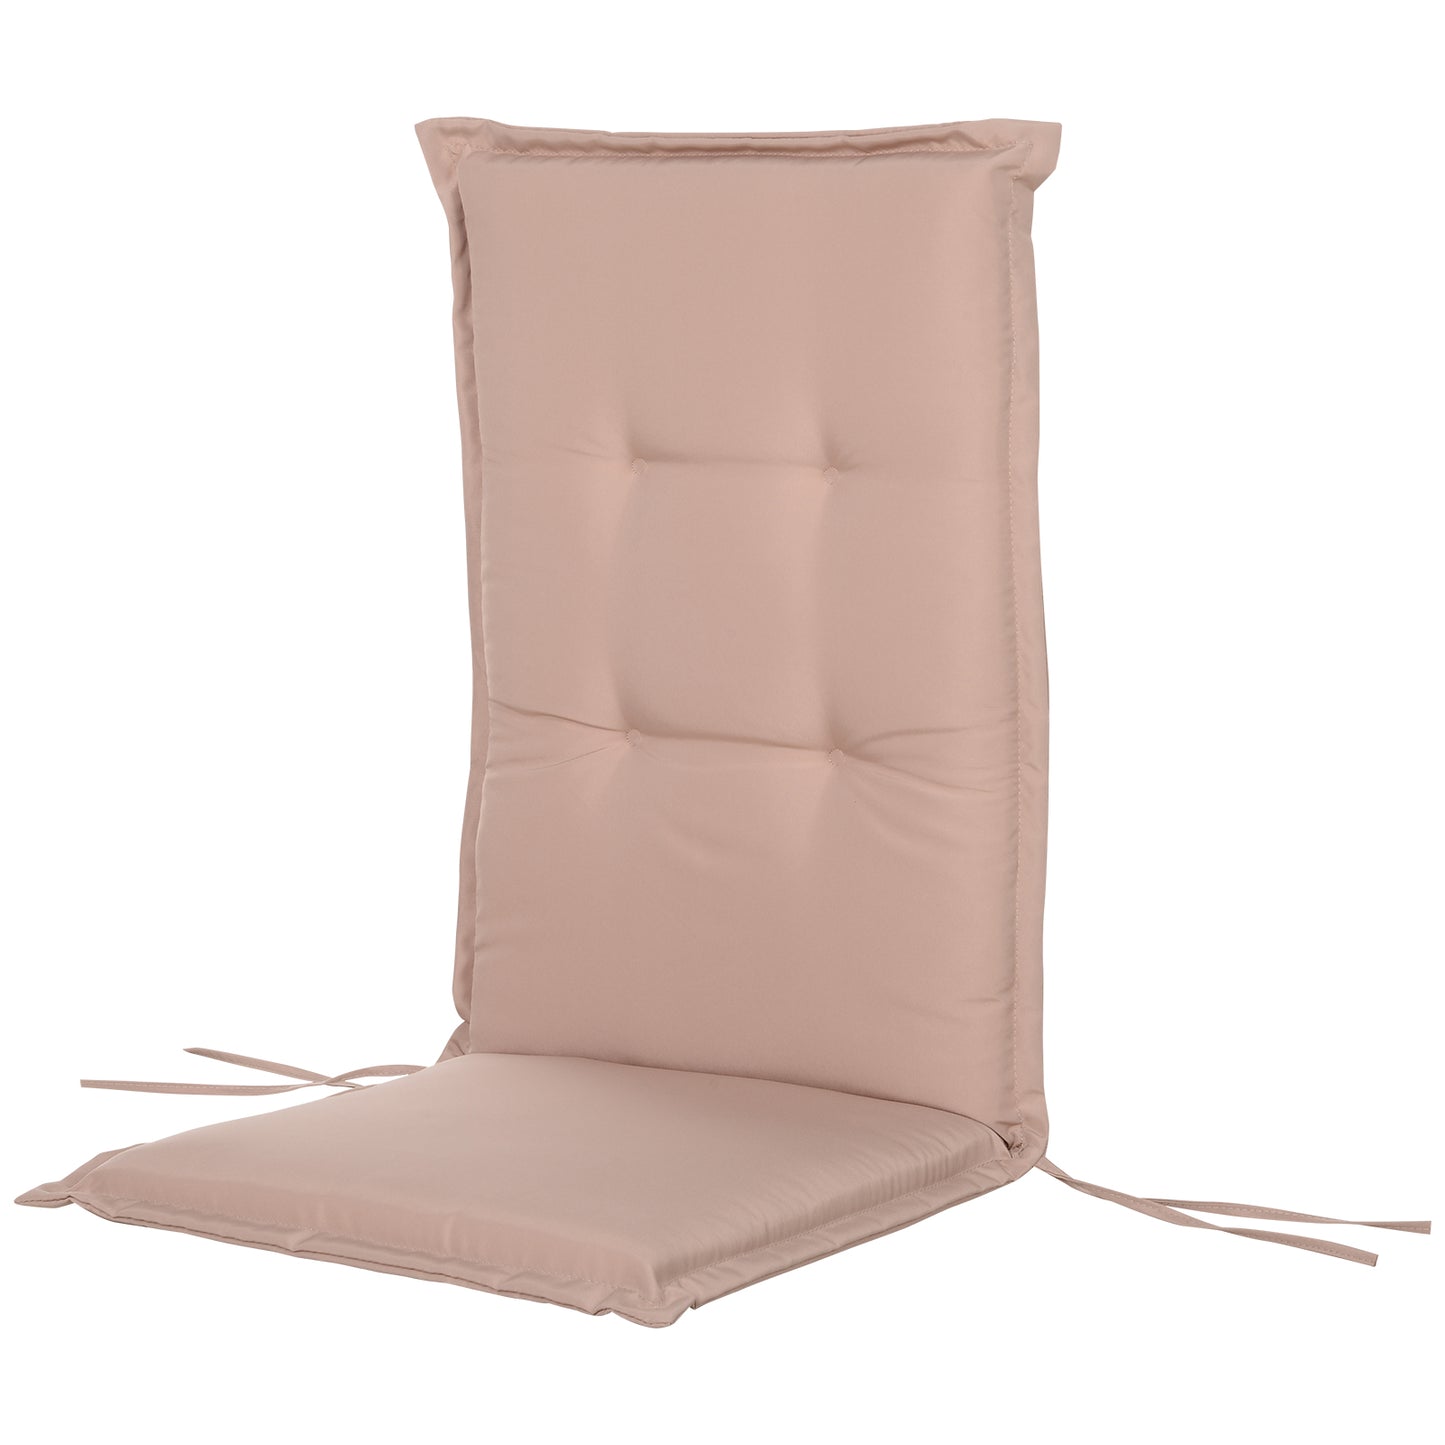 Outsunny Polyester High Back Outdoor Garden Chair Replacement Cushion Beige